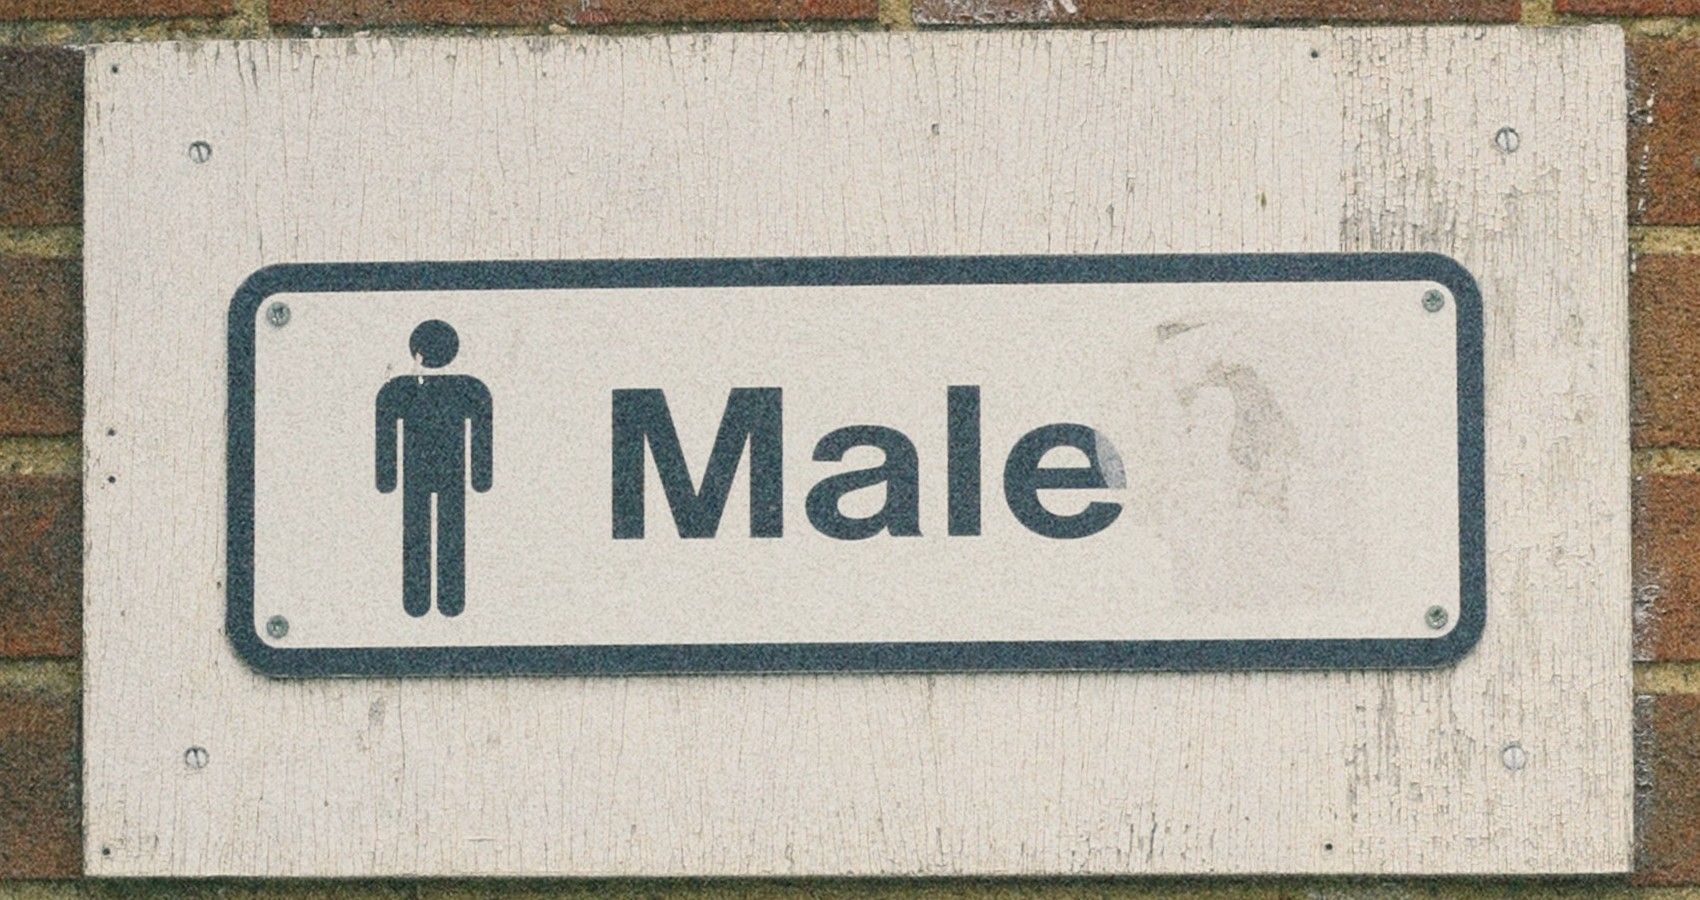 A sign for the male restroom